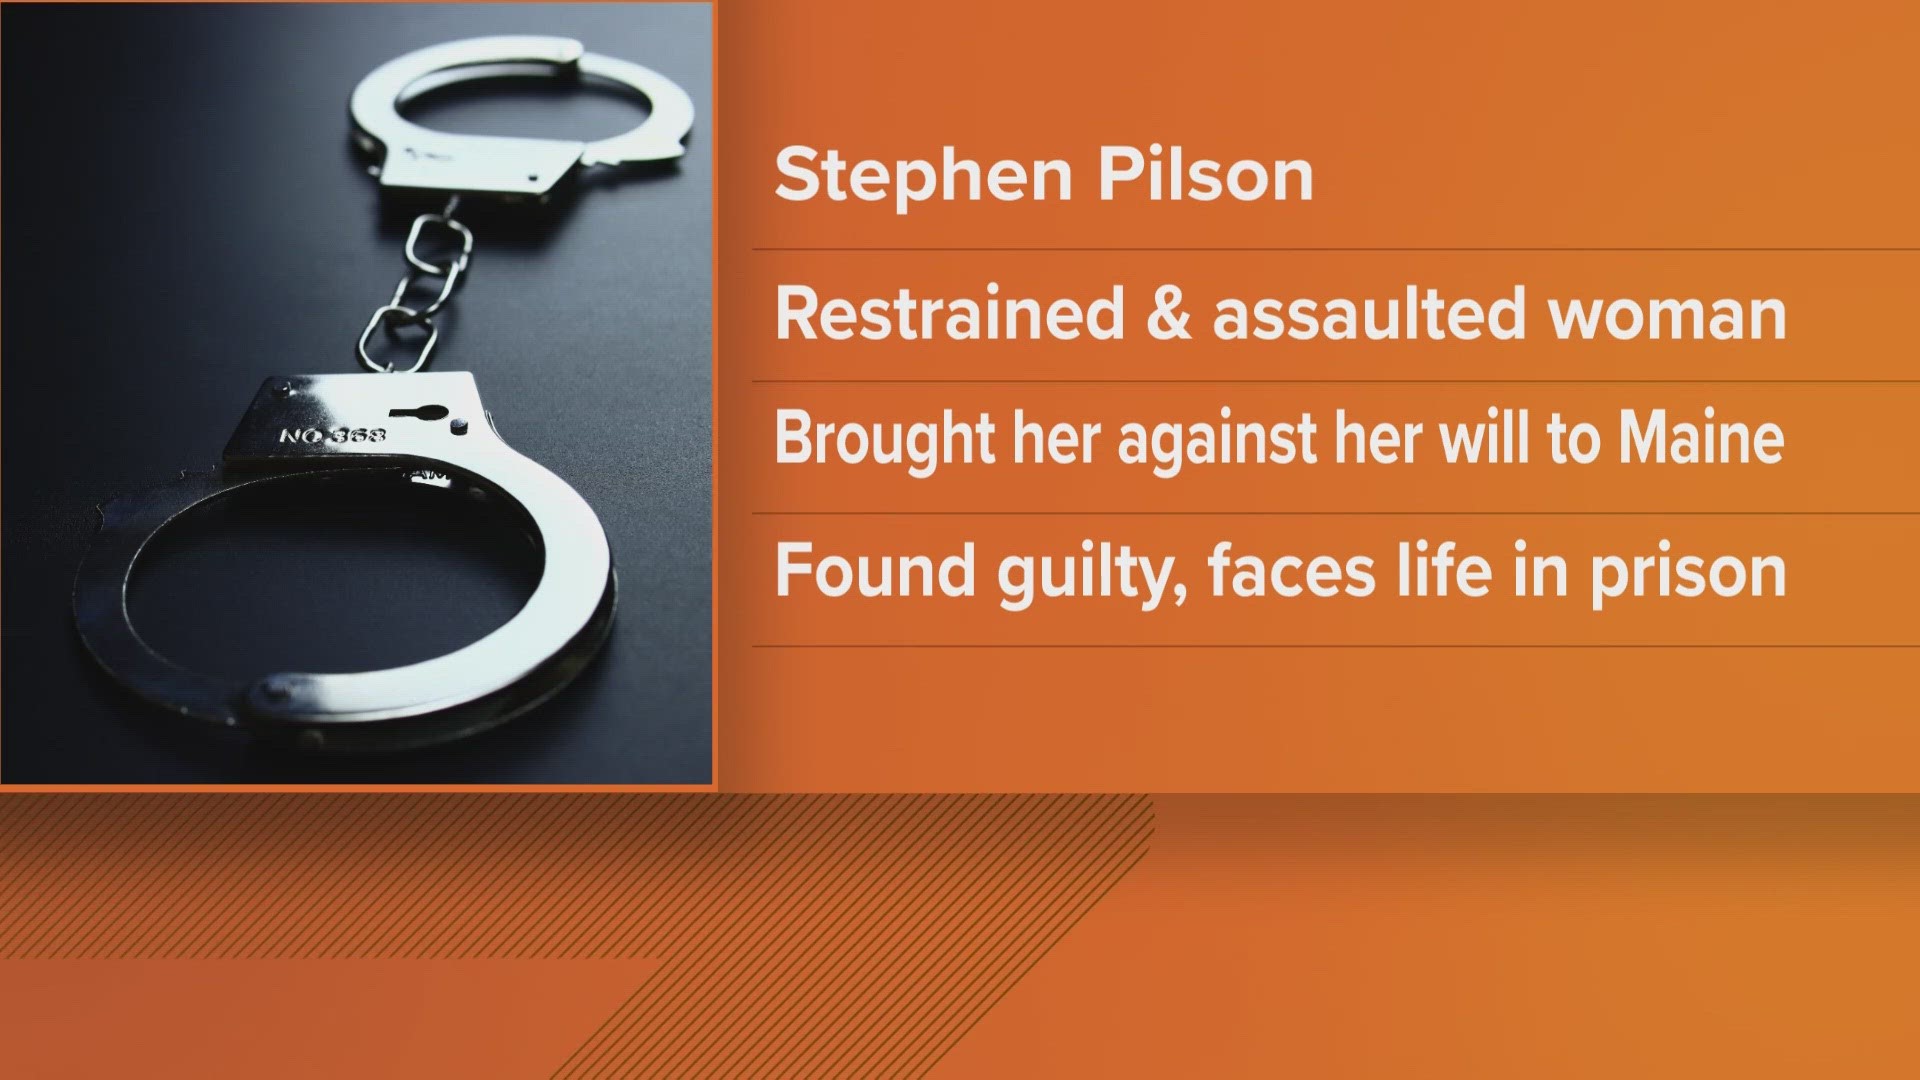 Stephen Pilson of Massachusetts was found guilty of forcing a woman into his car, restraining her, and assaulting her back in 2019.